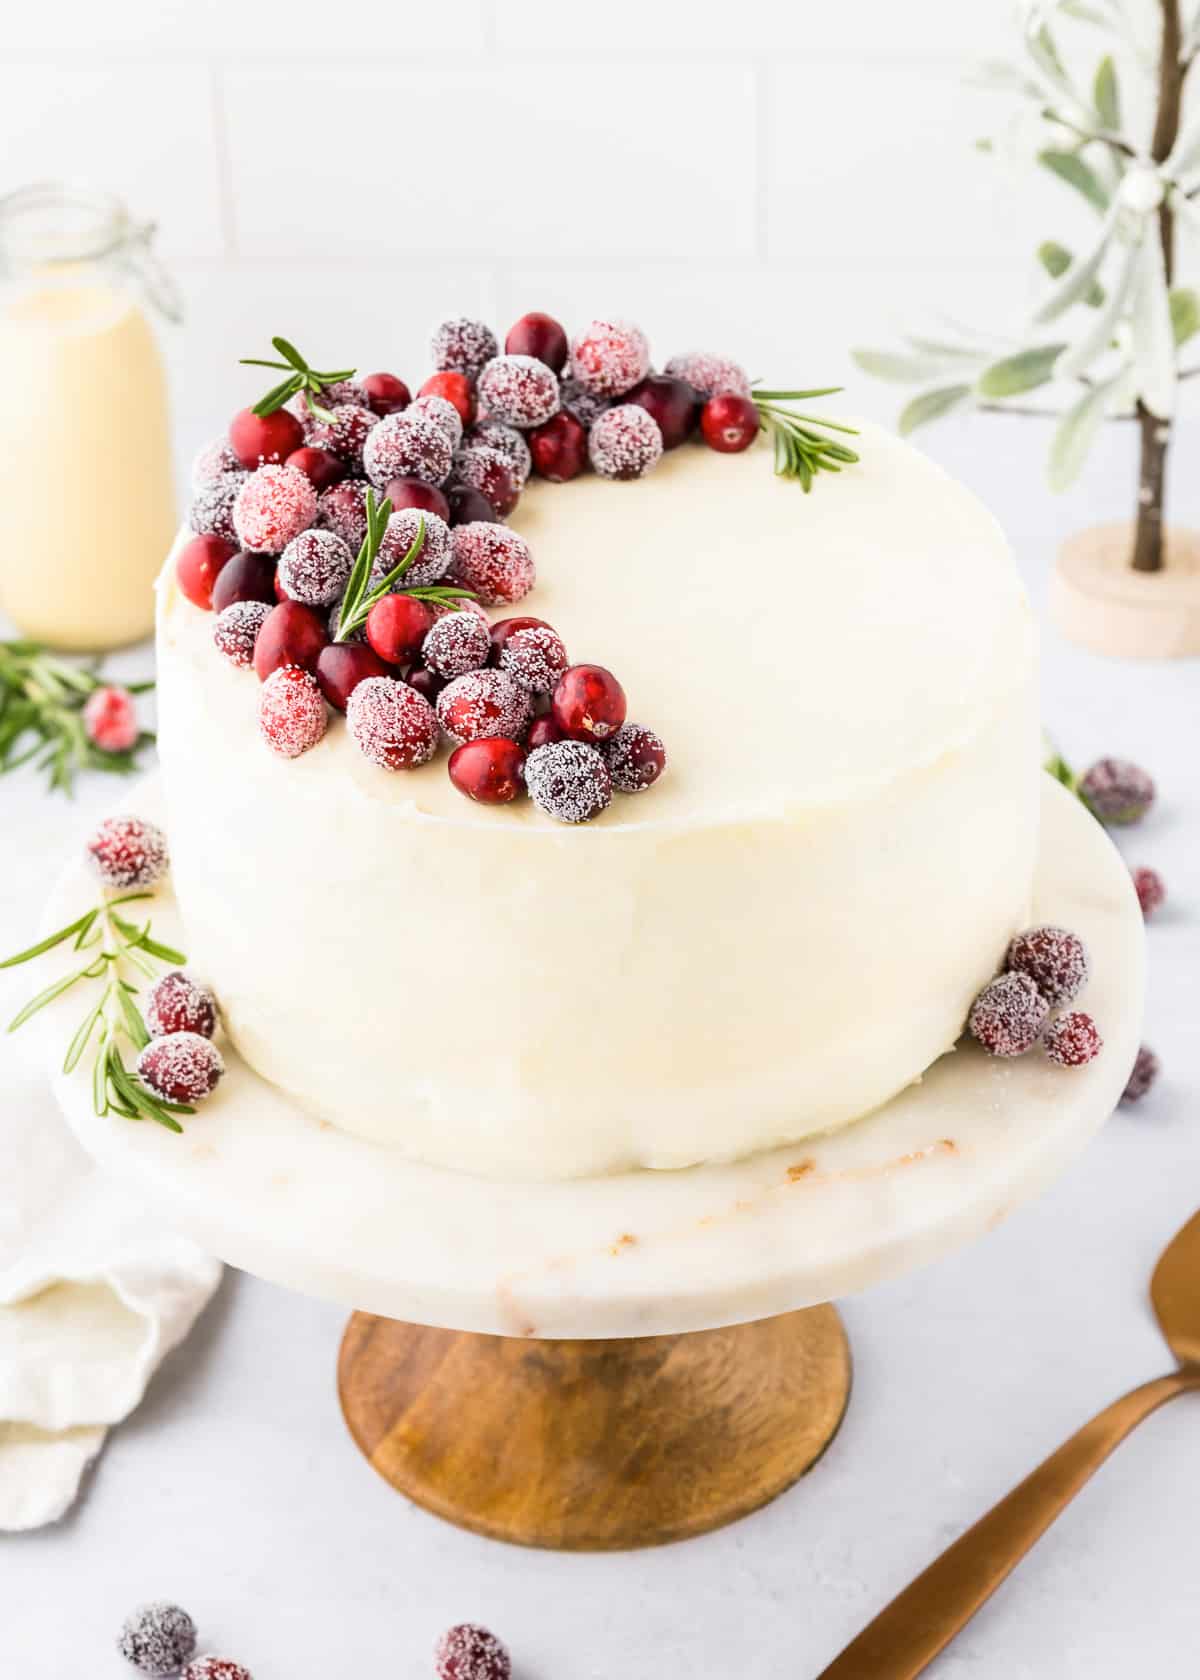 An eggnog cake on a cake stand garnished with fresh cranberries.